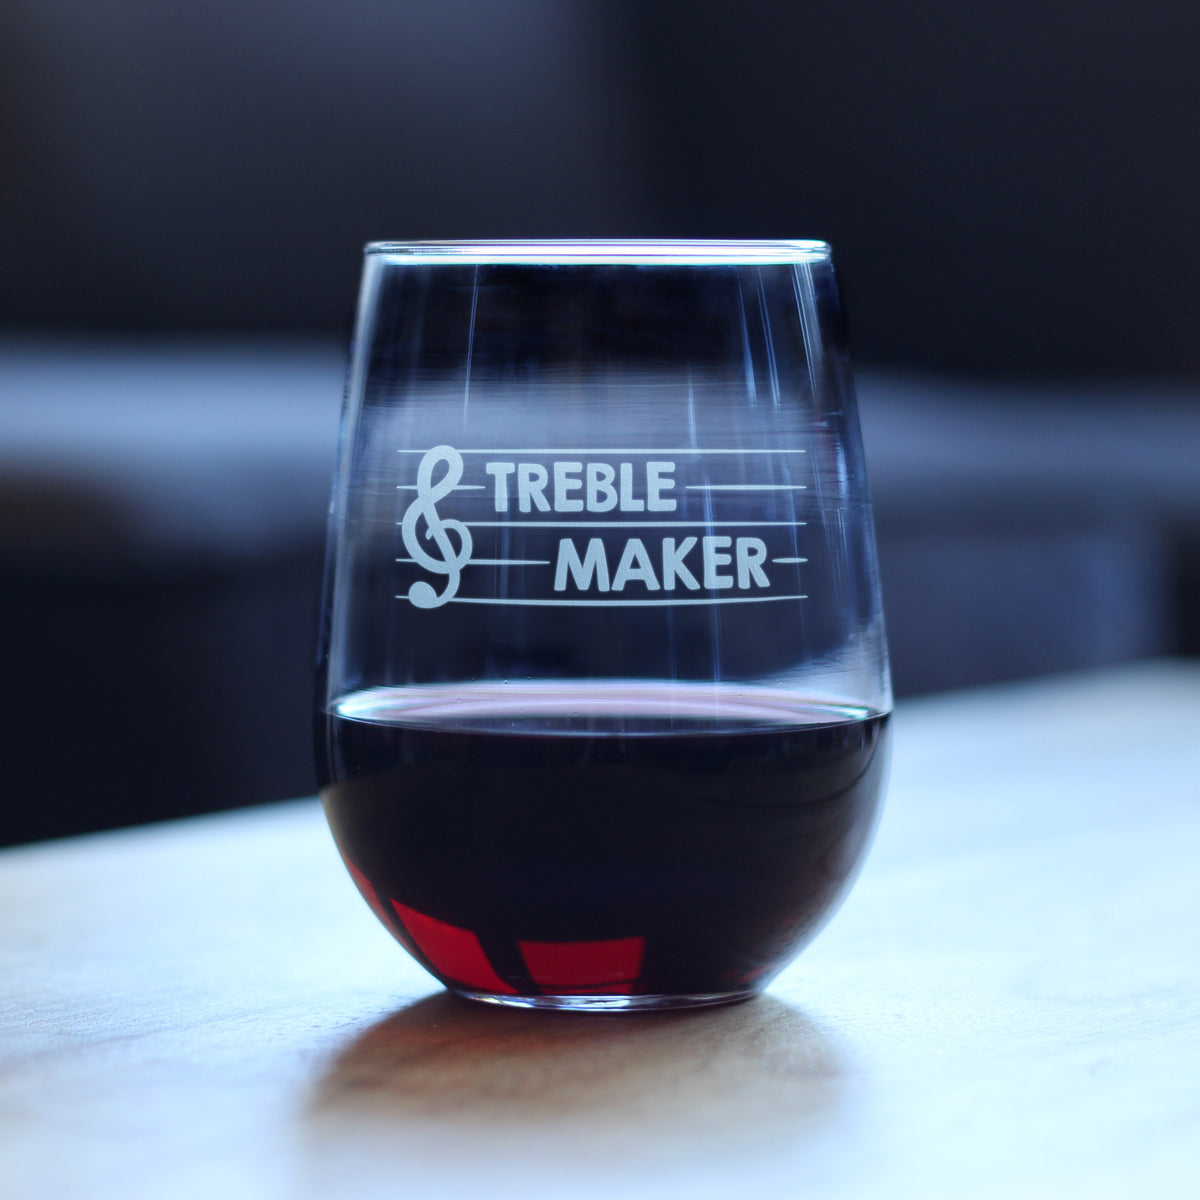 Treble Maker – Stemless Wine Glass - Cute Funny Music Teacher Gifts for Women and Men - Fun Unique Musical Decor - Large